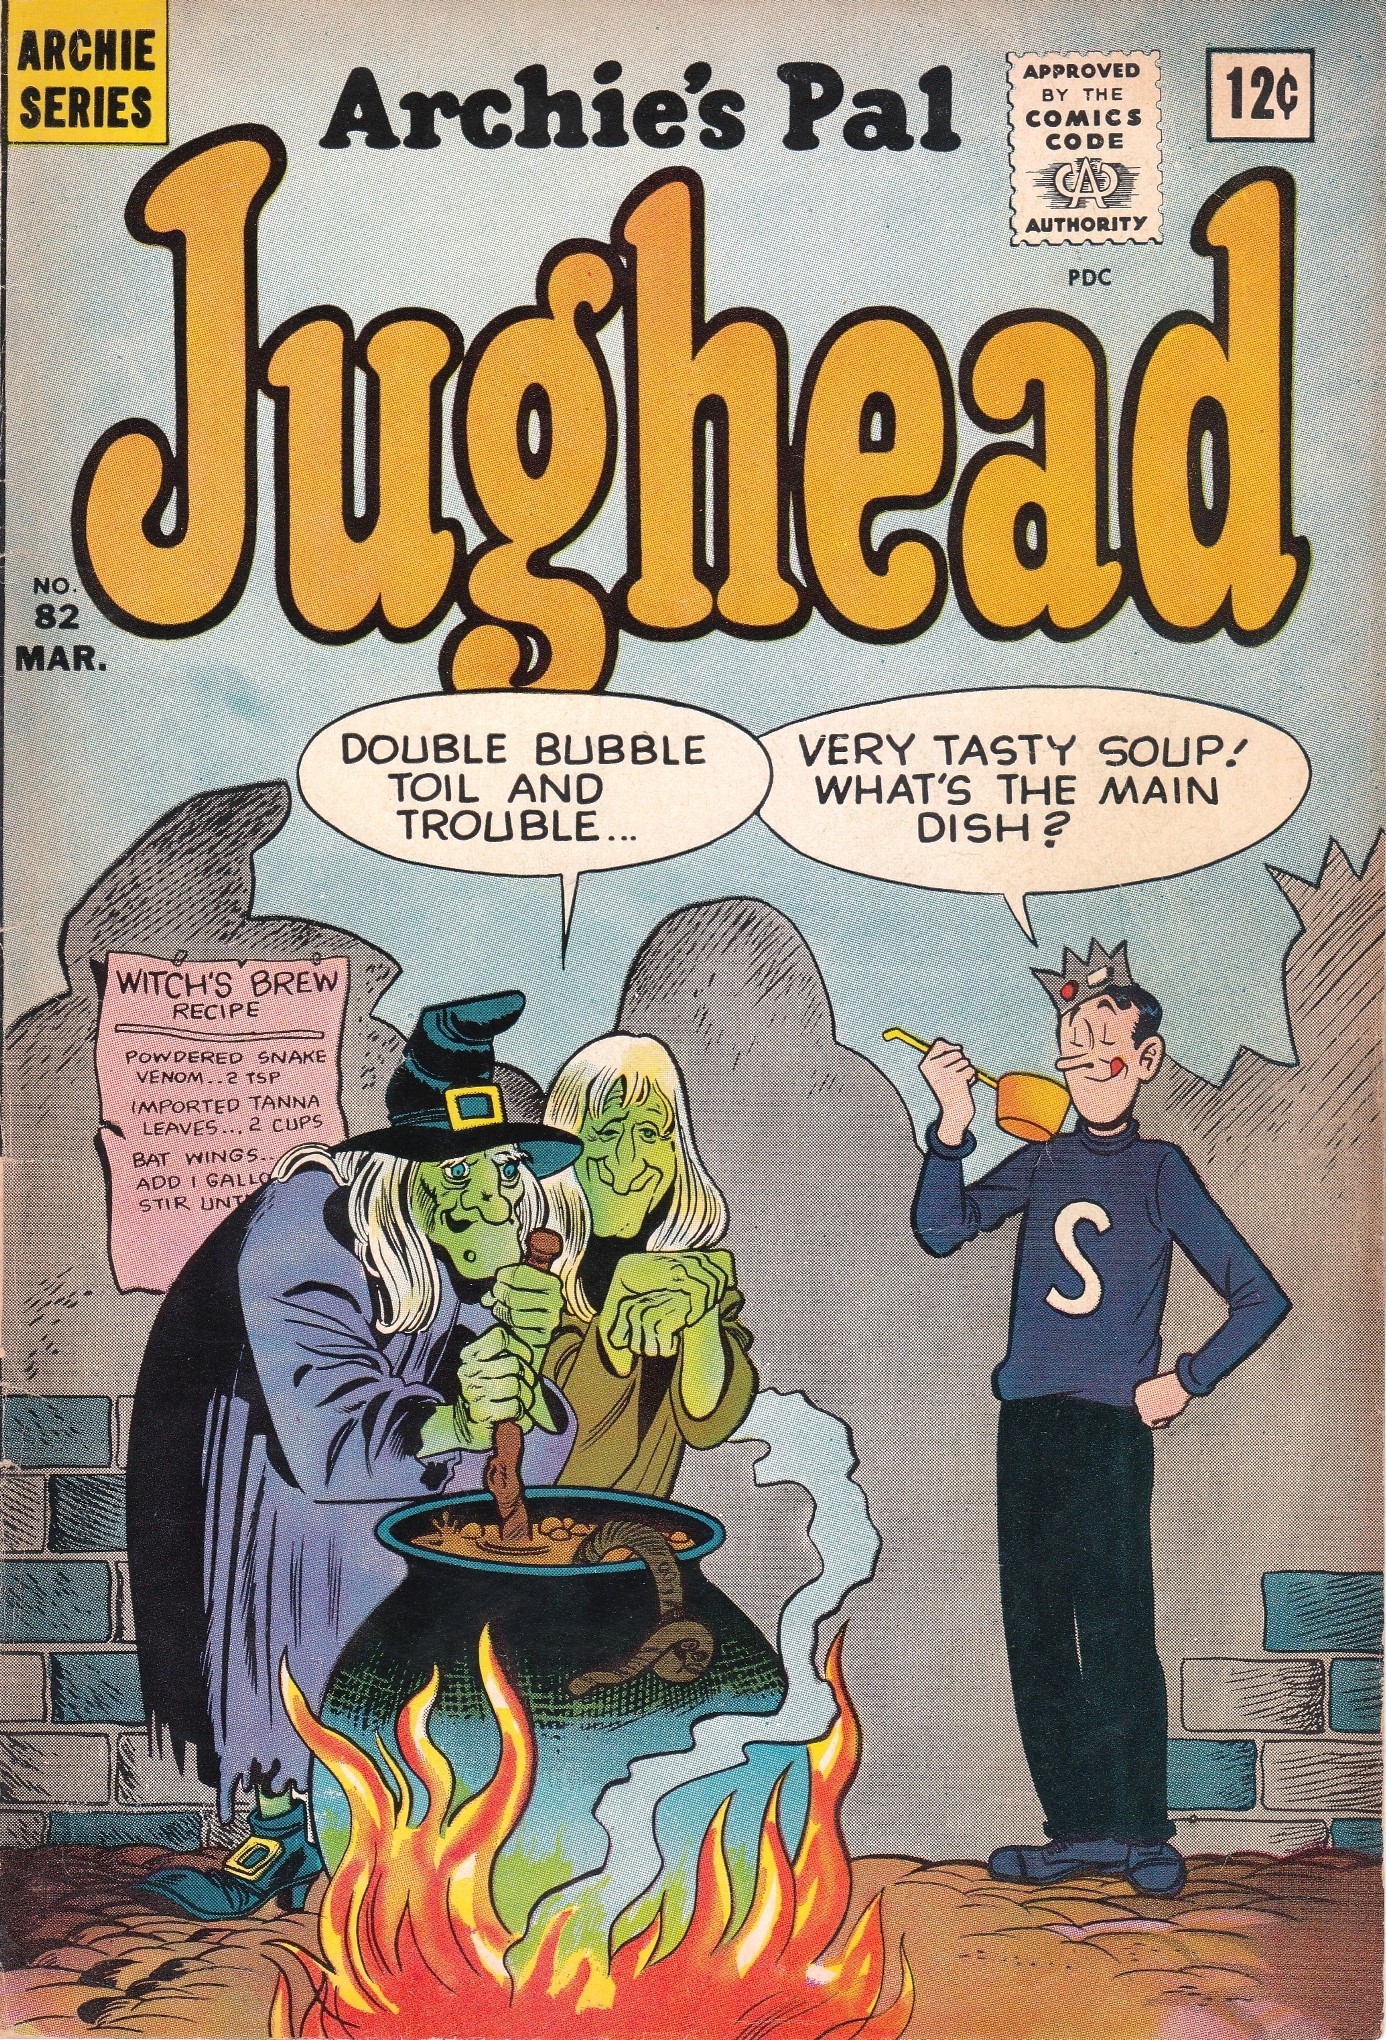 Read online Archie's Pal Jughead comic -  Issue #82 - 1